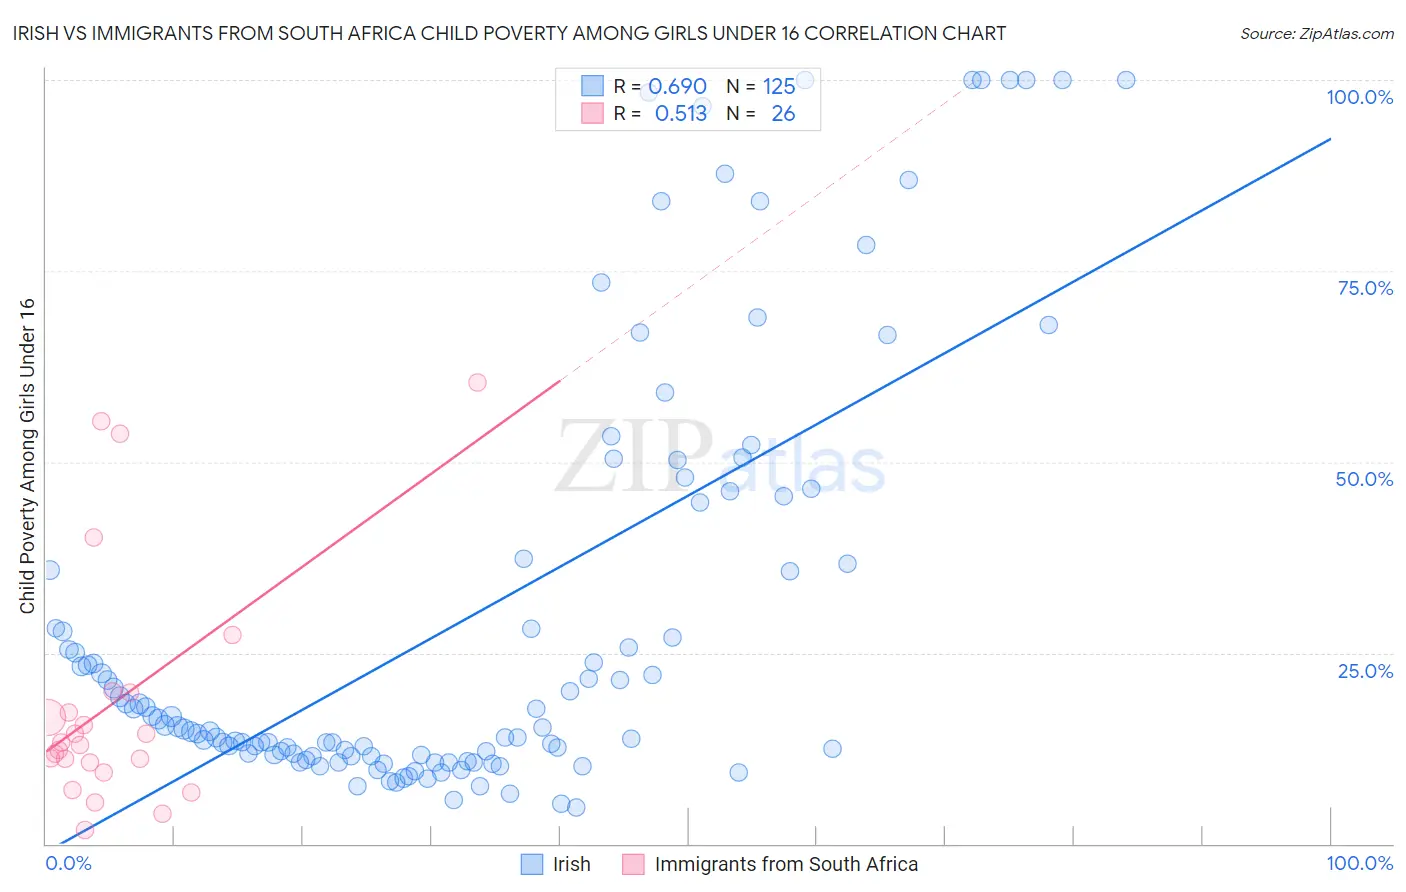 Irish vs Immigrants from South Africa Child Poverty Among Girls Under 16